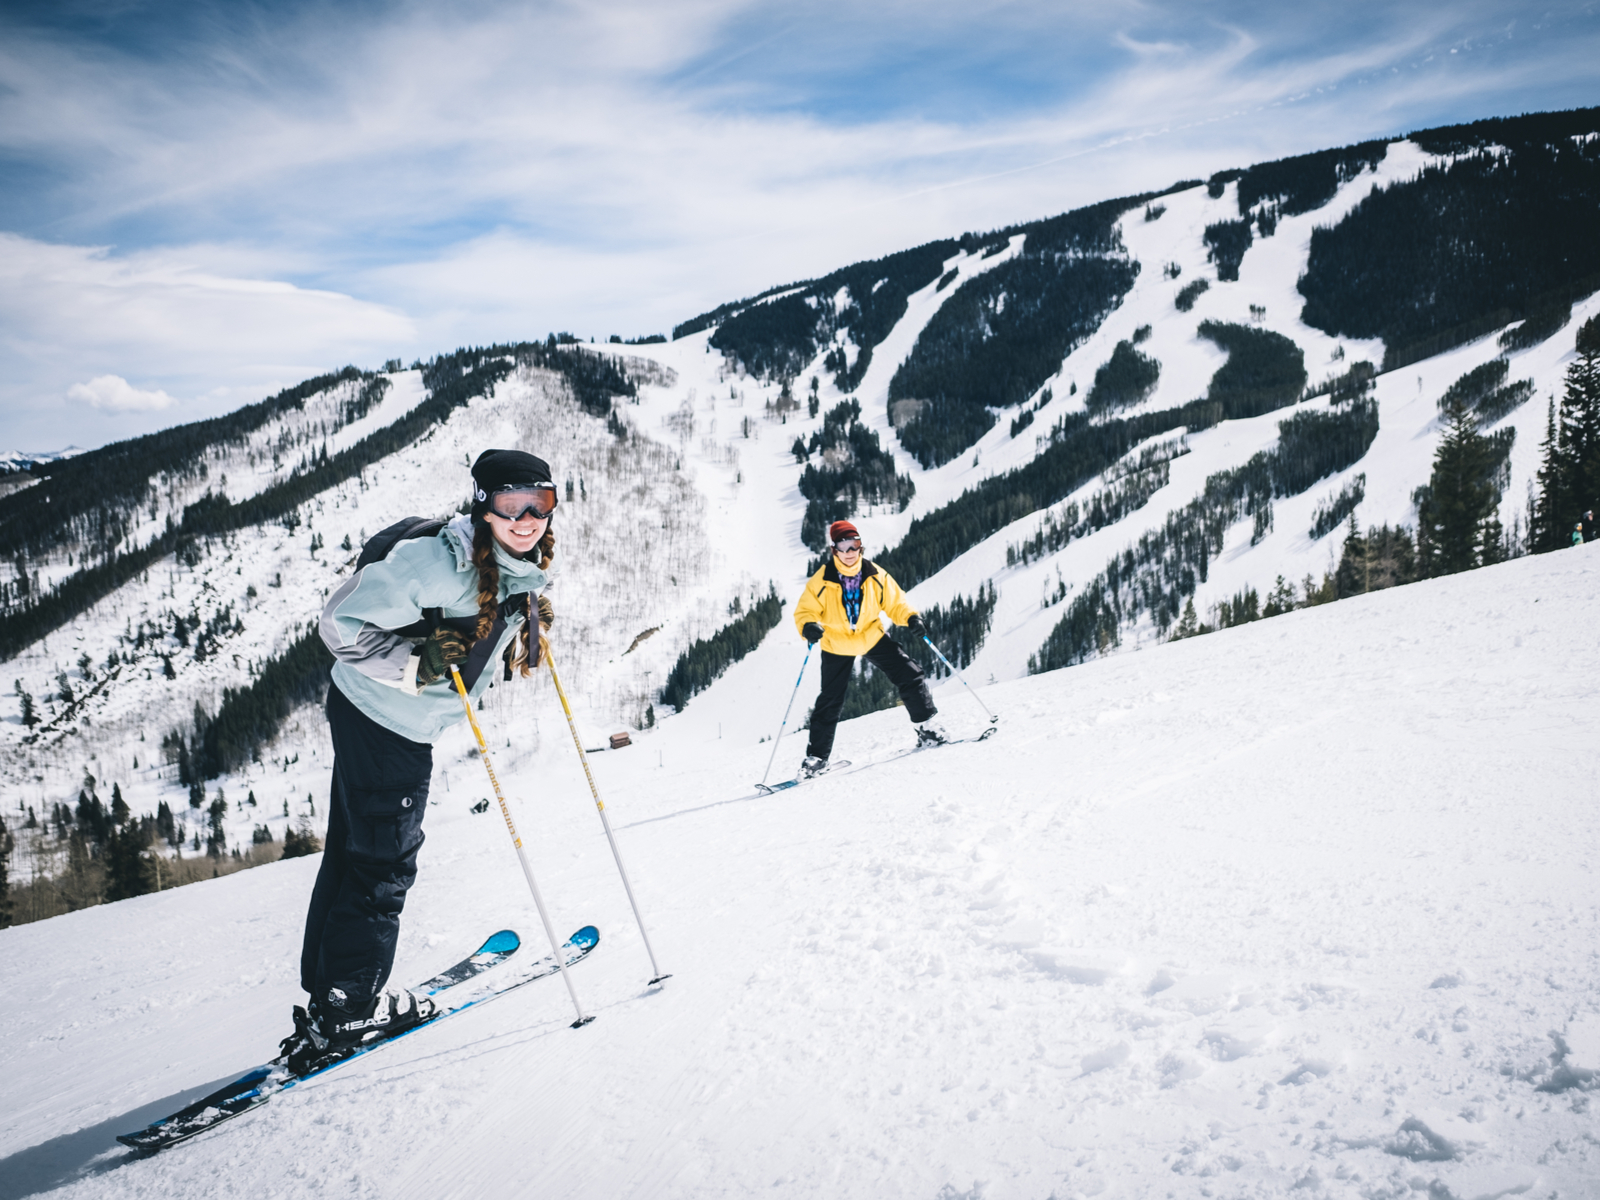 Two skiers going up the slopes at Beaver Creek Resort, one of the best ski resorts near Denver